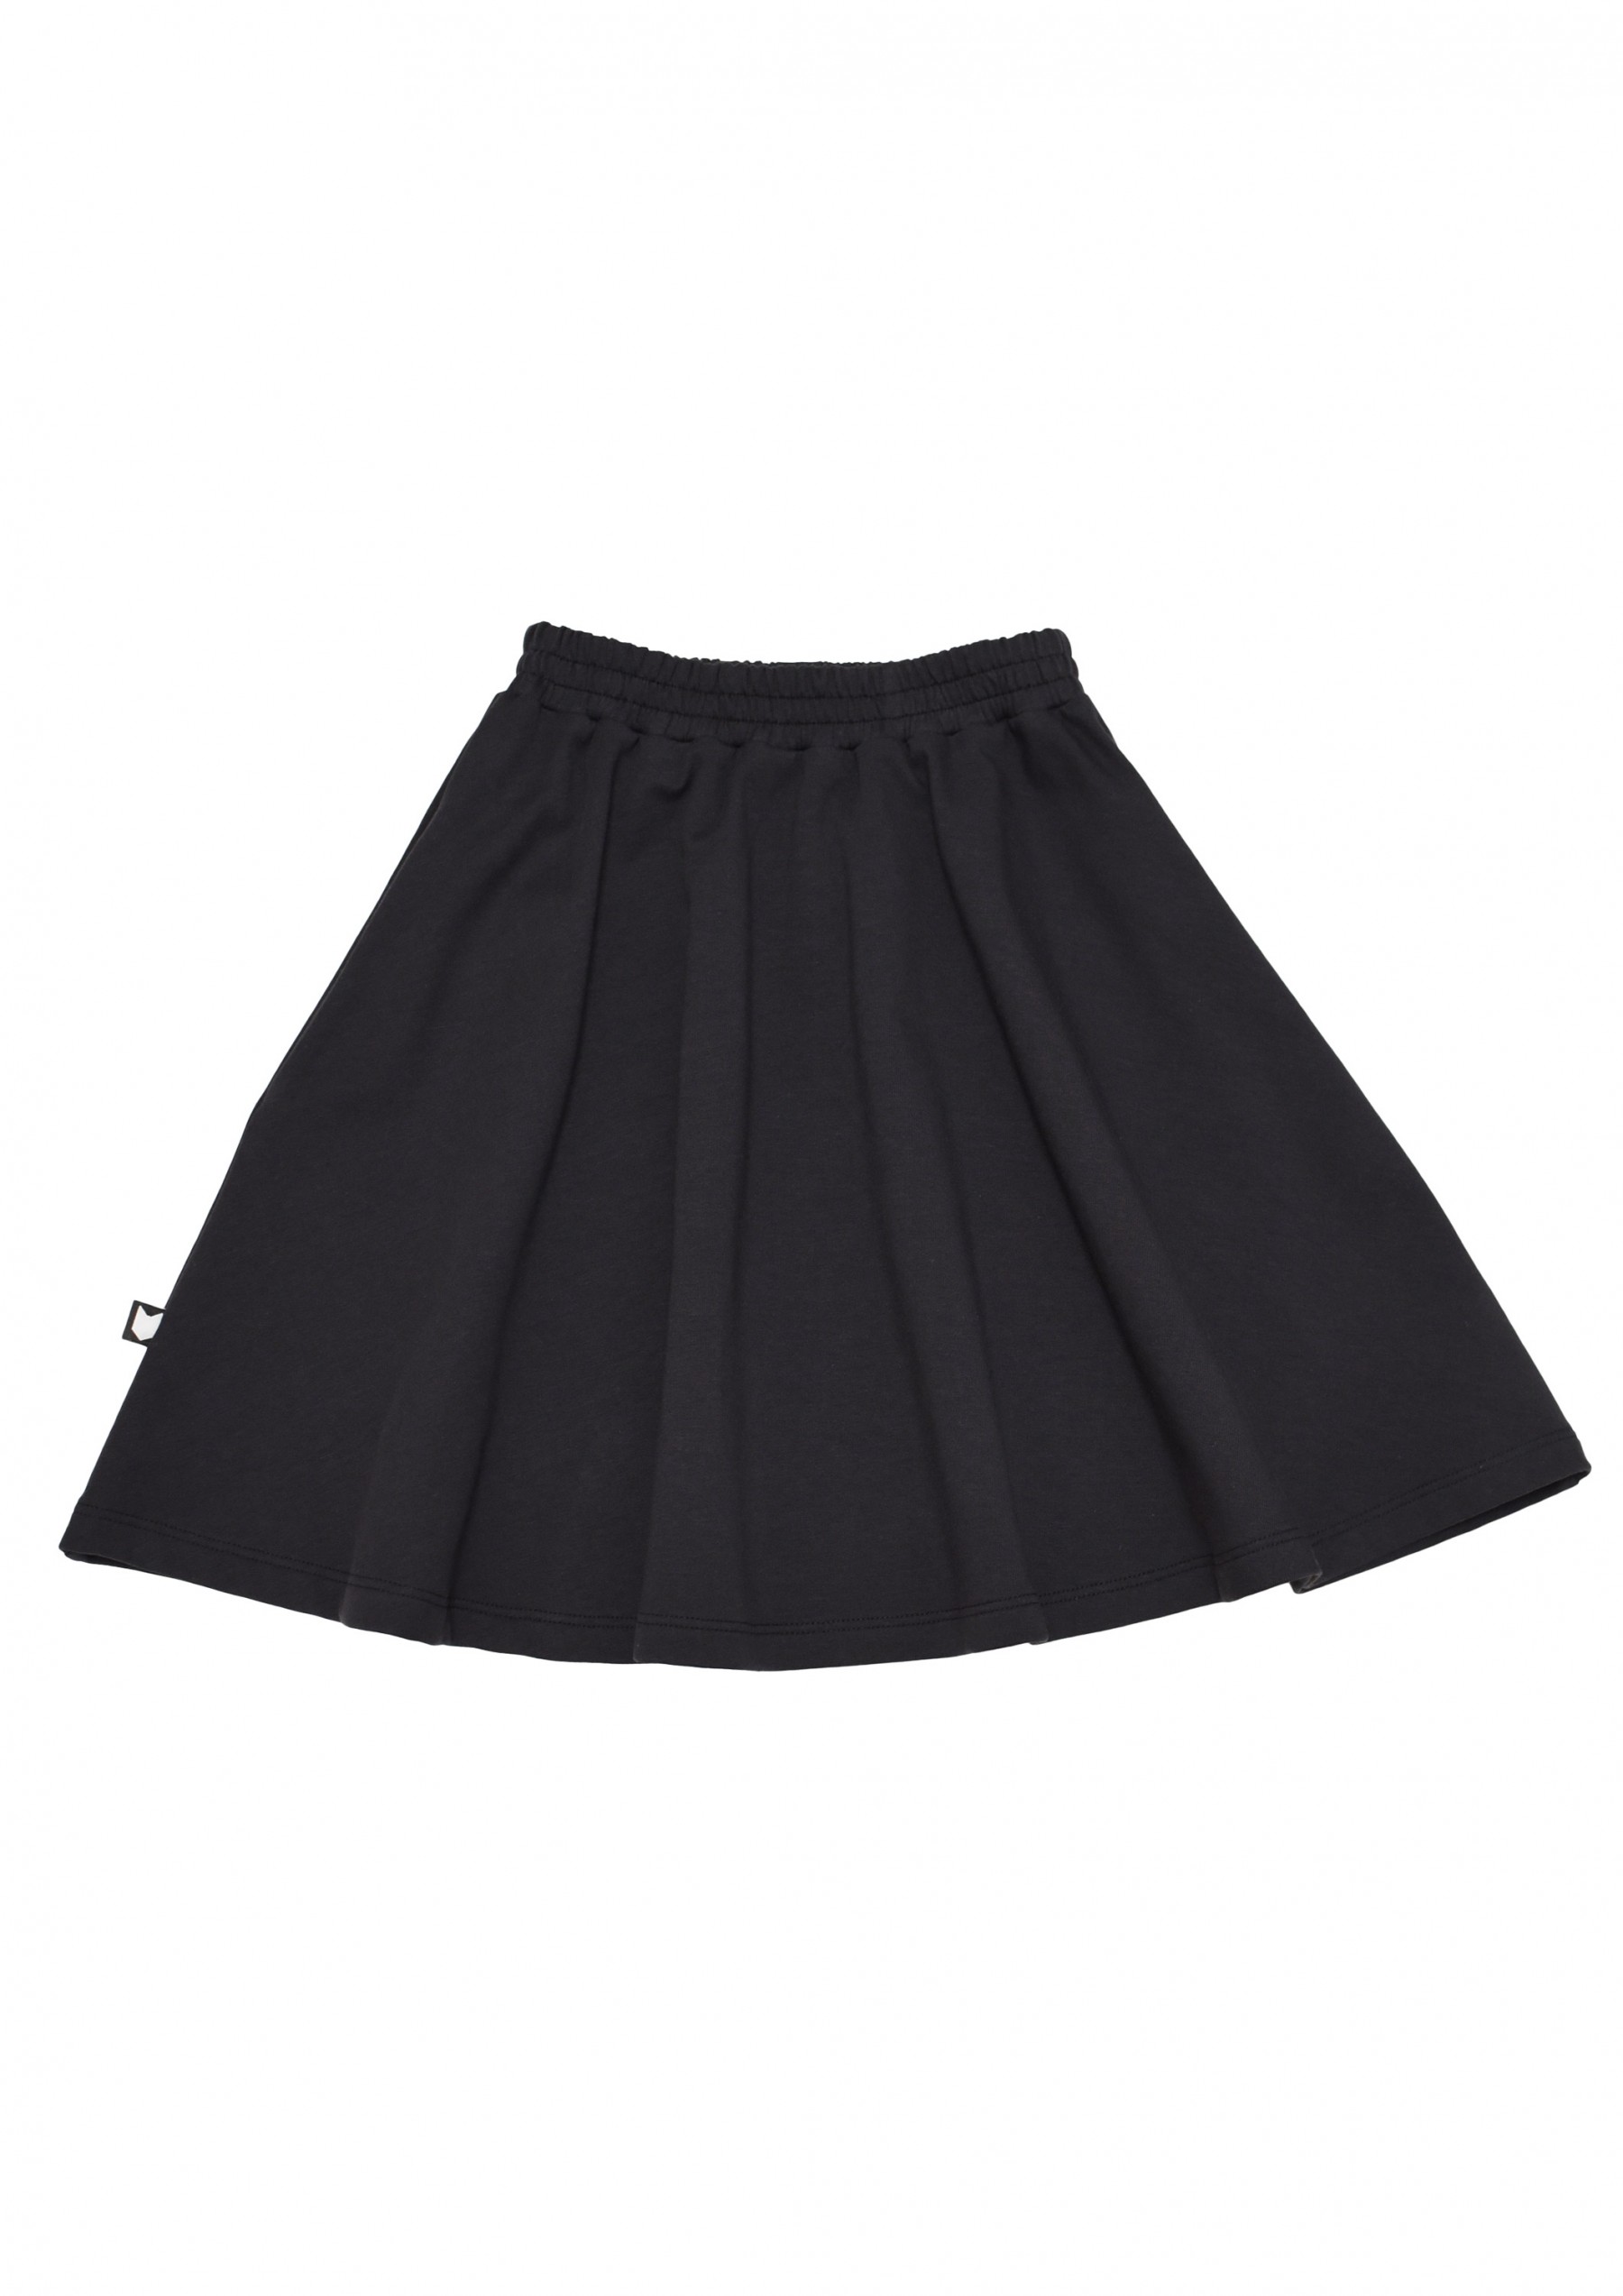 Skirts anthracite grey | HEBE